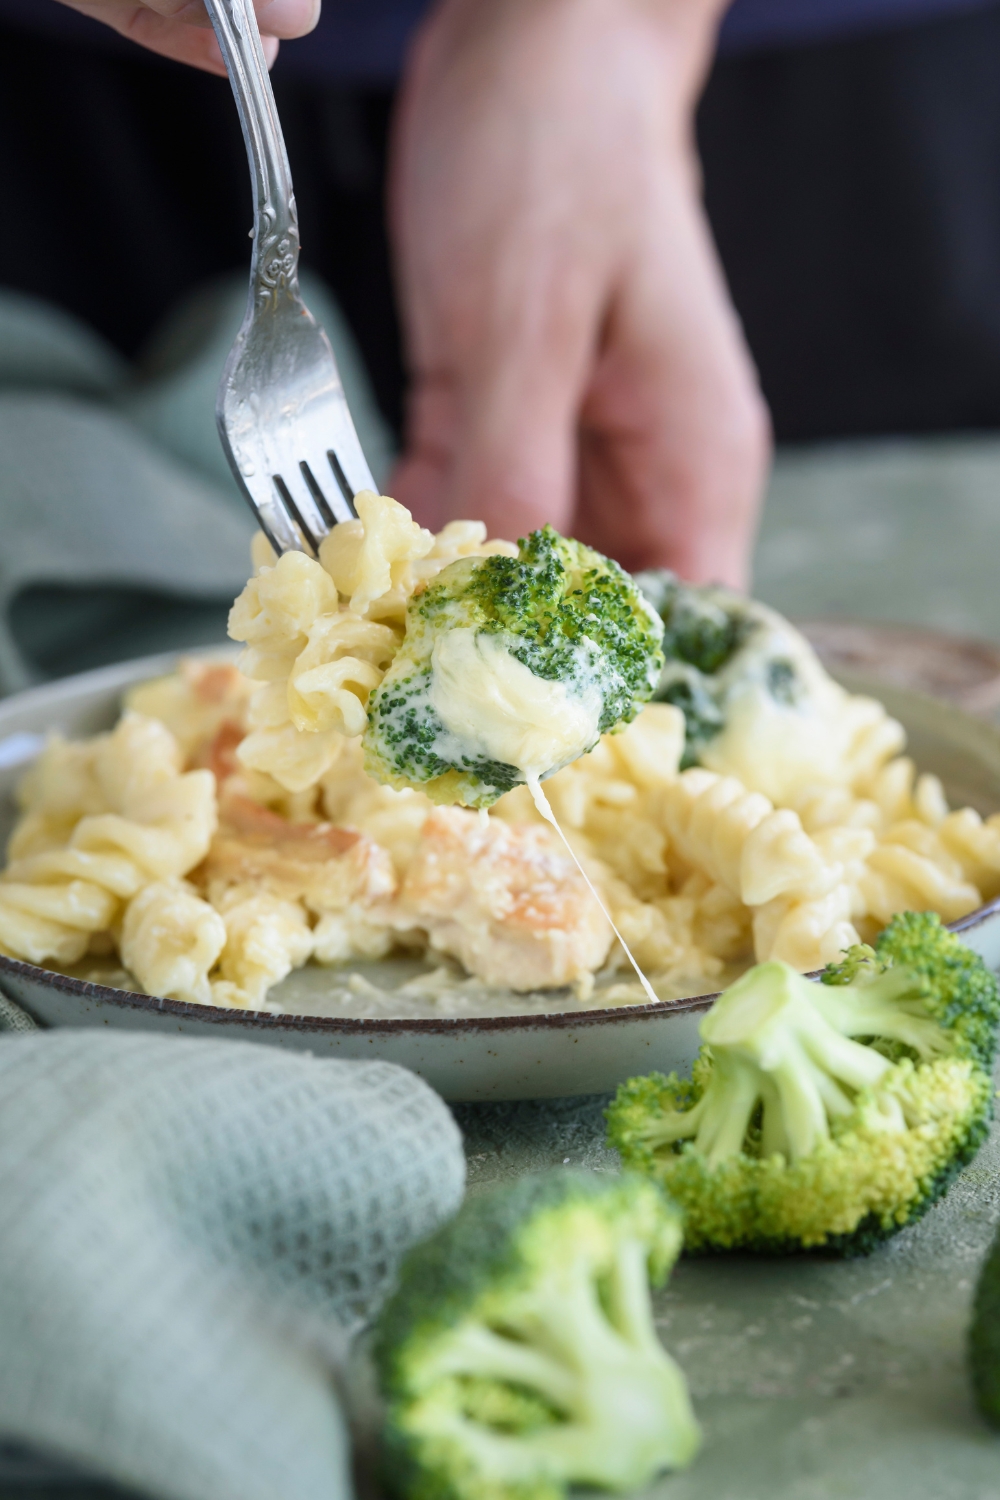 A fork holding a bite of pasta in cream sauce with a piece of broccoli at the end of the fork. Cheese is stringing from the broccoli to the plate of pasta.